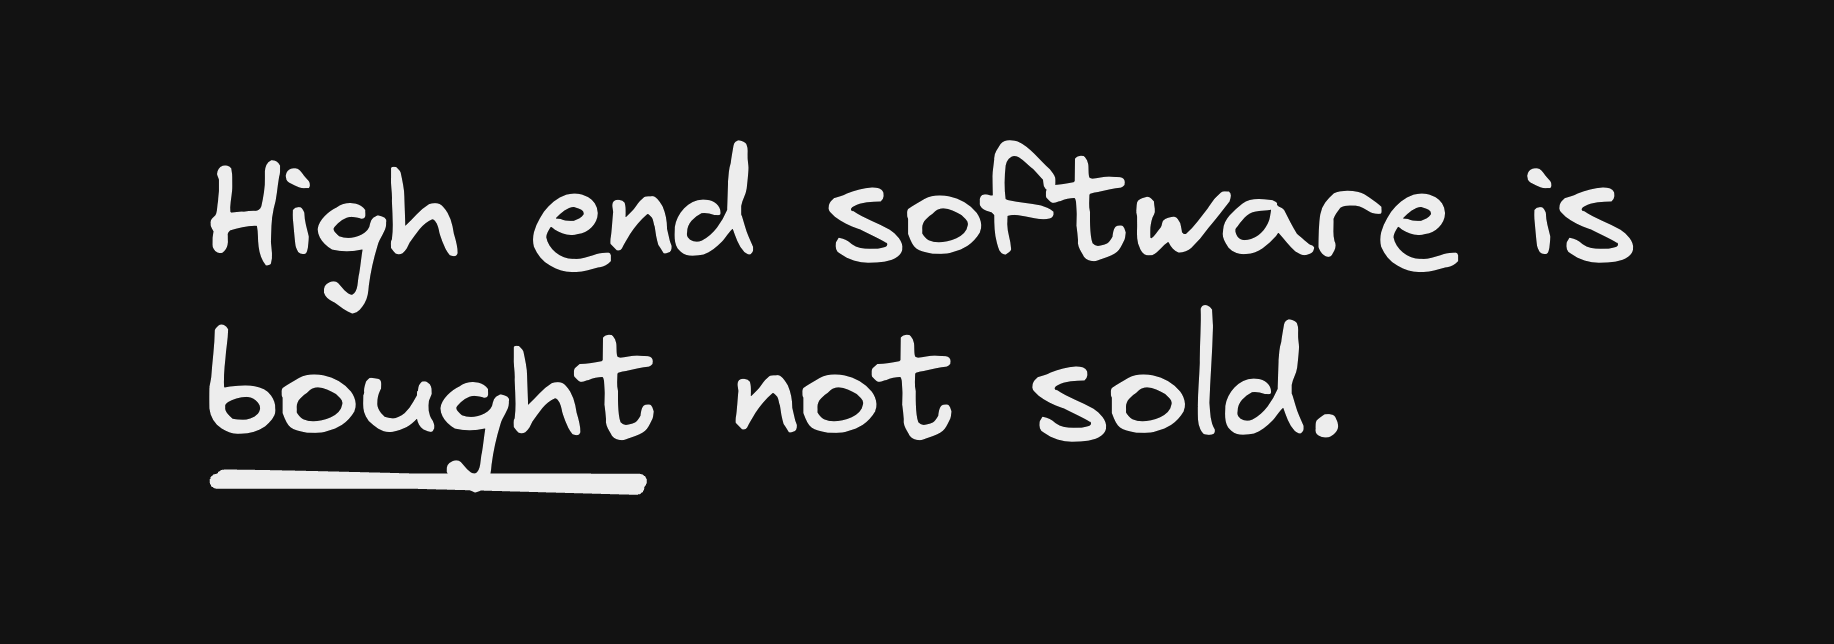 High end software is bought not sold